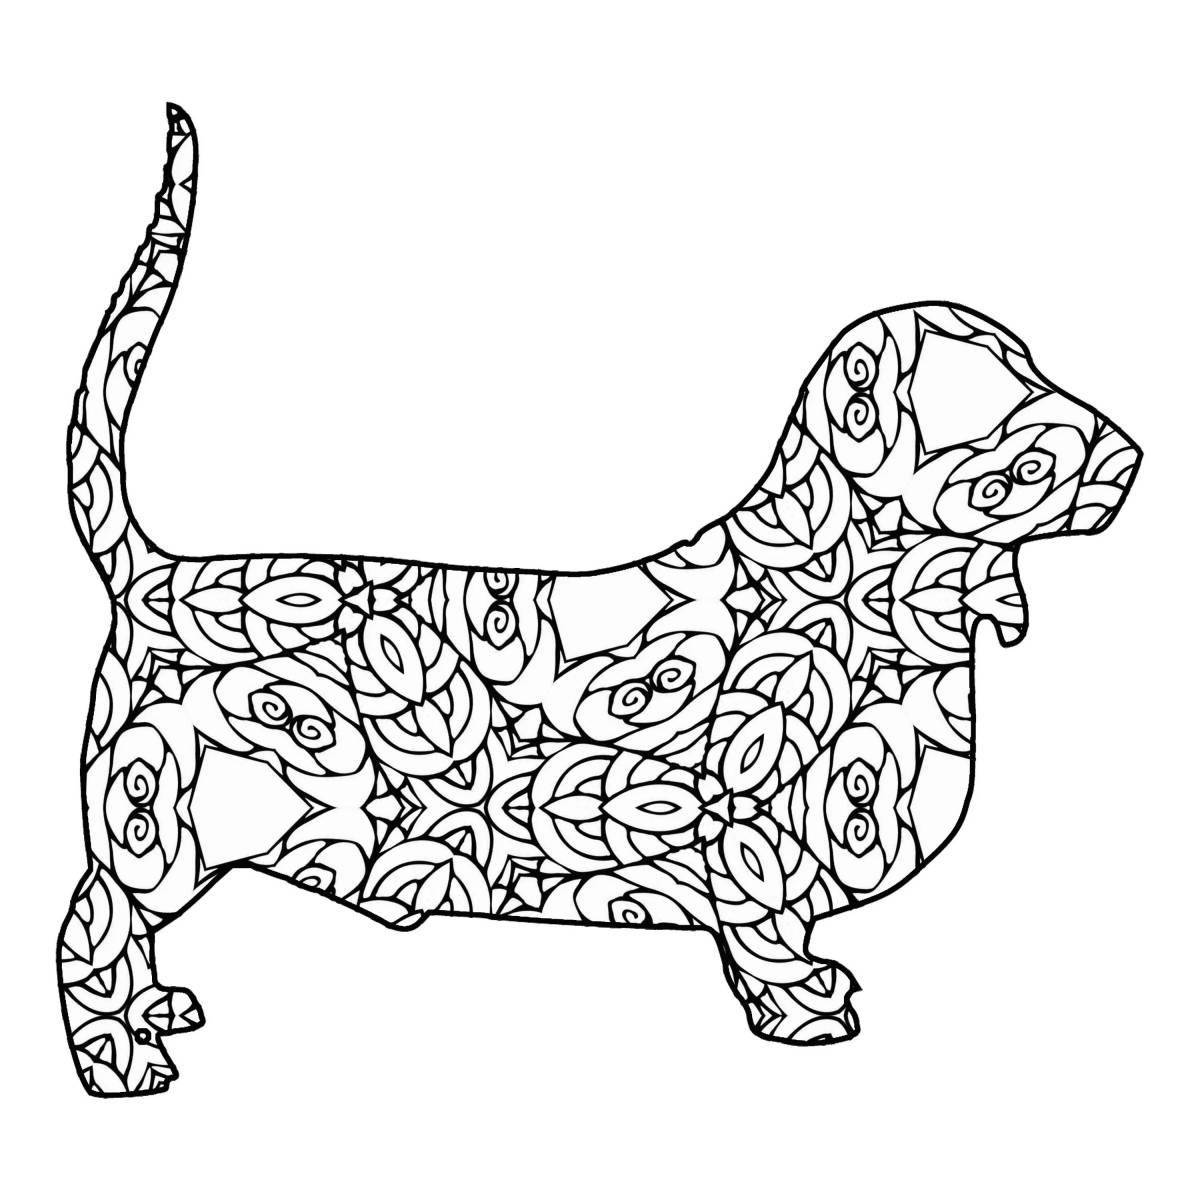 Adorable patterned dog coloring book